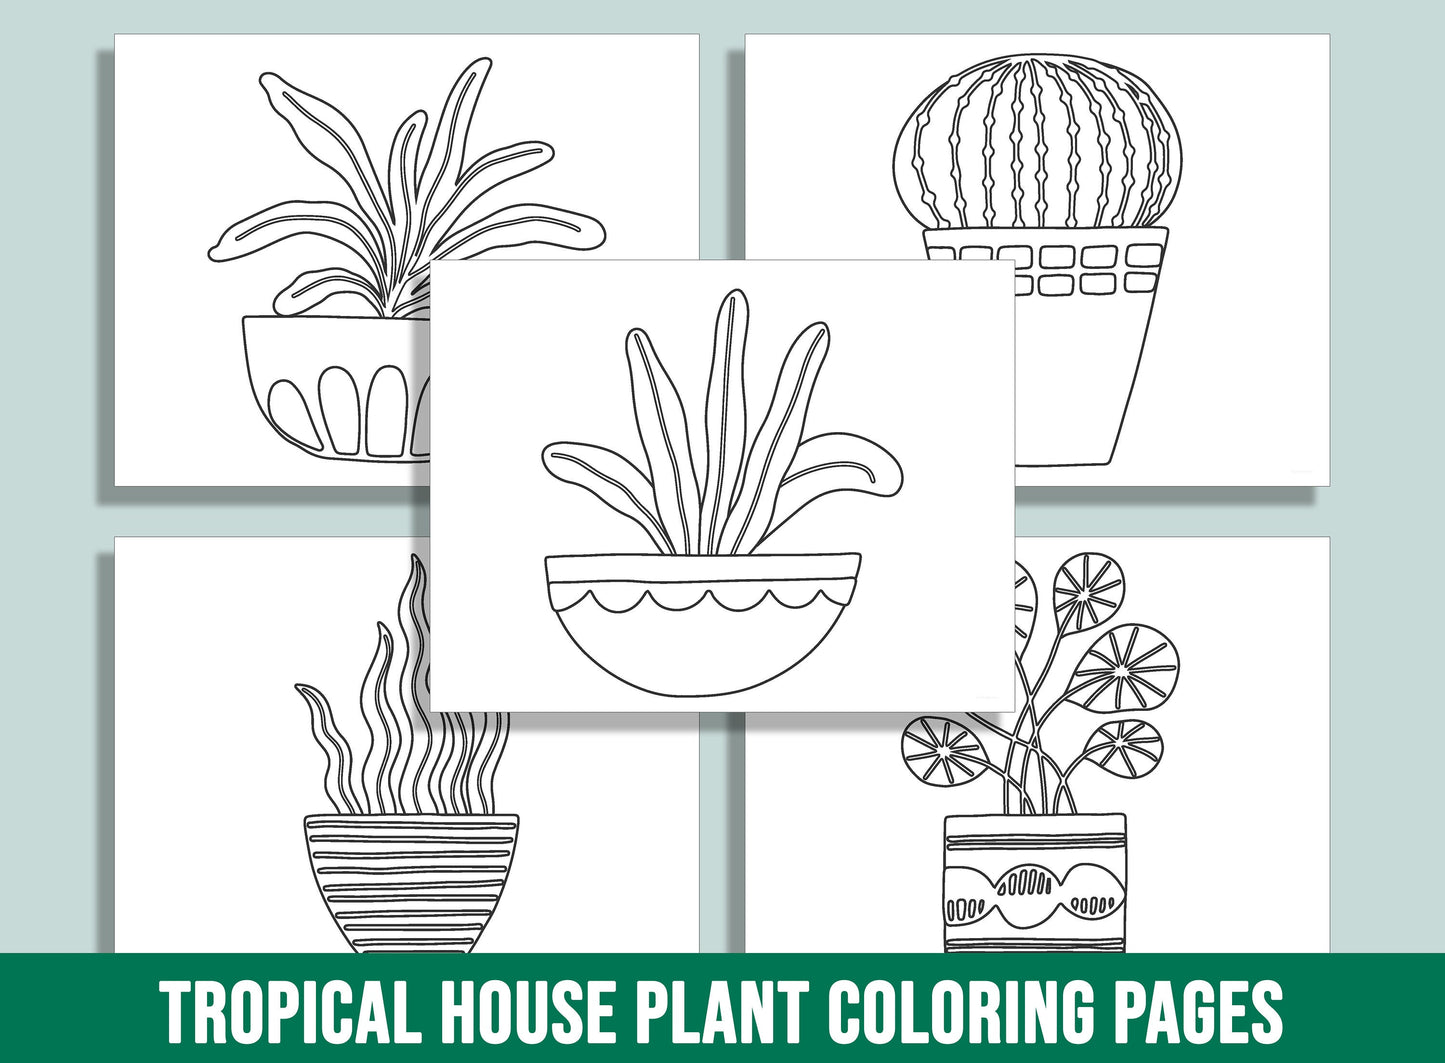 30 Tropical House Plant Coloring Pages: A Botanical Paradise to Color, PDF File, Instant Download